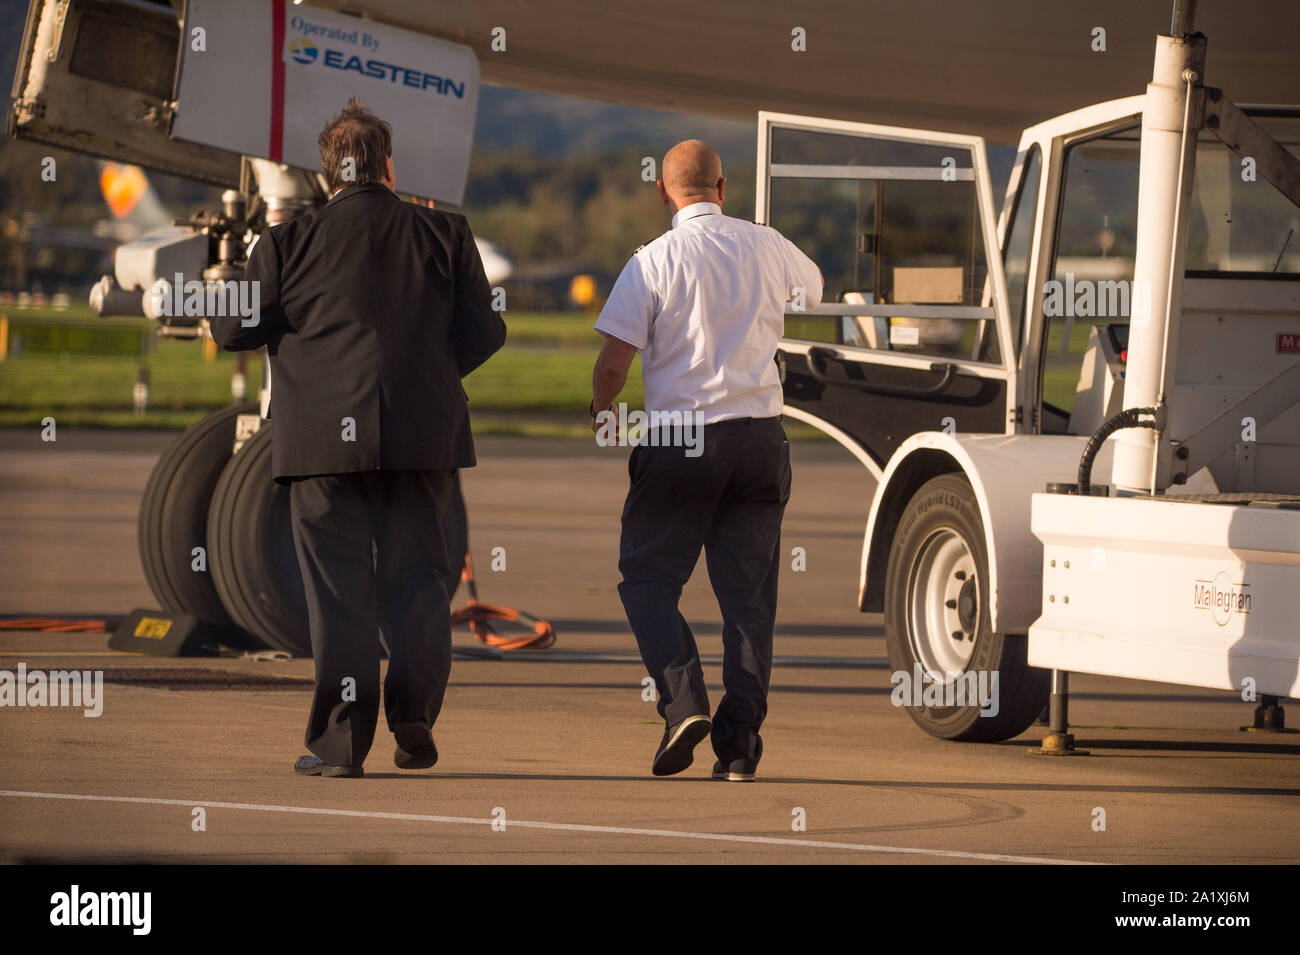 Glasgow, UK. 28 September 2019.  Pictured: Flight crew seen on the tarmac after disembarking their Eastern Boeing 767-300 after just landing. Following the immediate fallout from the collapsed tour company Thomas Cook, Operation Matterhorn is still in full swing at Glasgow Airport. The grounded and impounded Thomas Cook aircraft have been moved to a quieter part of the airfield to make way for the wide body fleet needed for operation Matterhorn. Colin Fisher/CDFIMAGES.COM Stock Photo